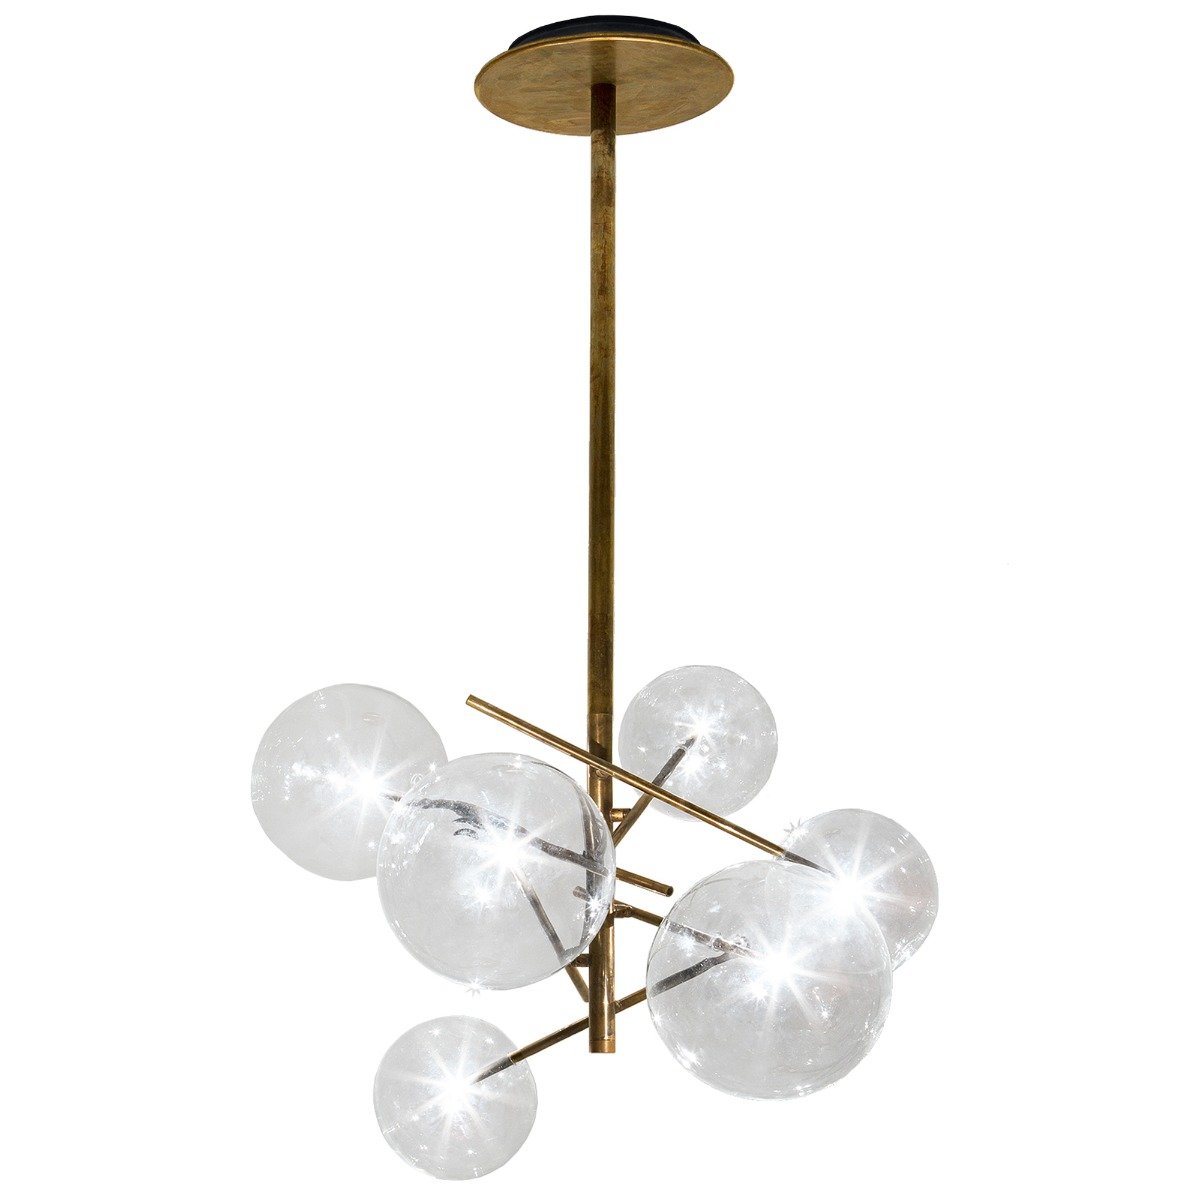 Galotti and Radice Bolle Hanging Pendant Lamp With 4 Spheres Light, Gold | Barker & Stonehouse